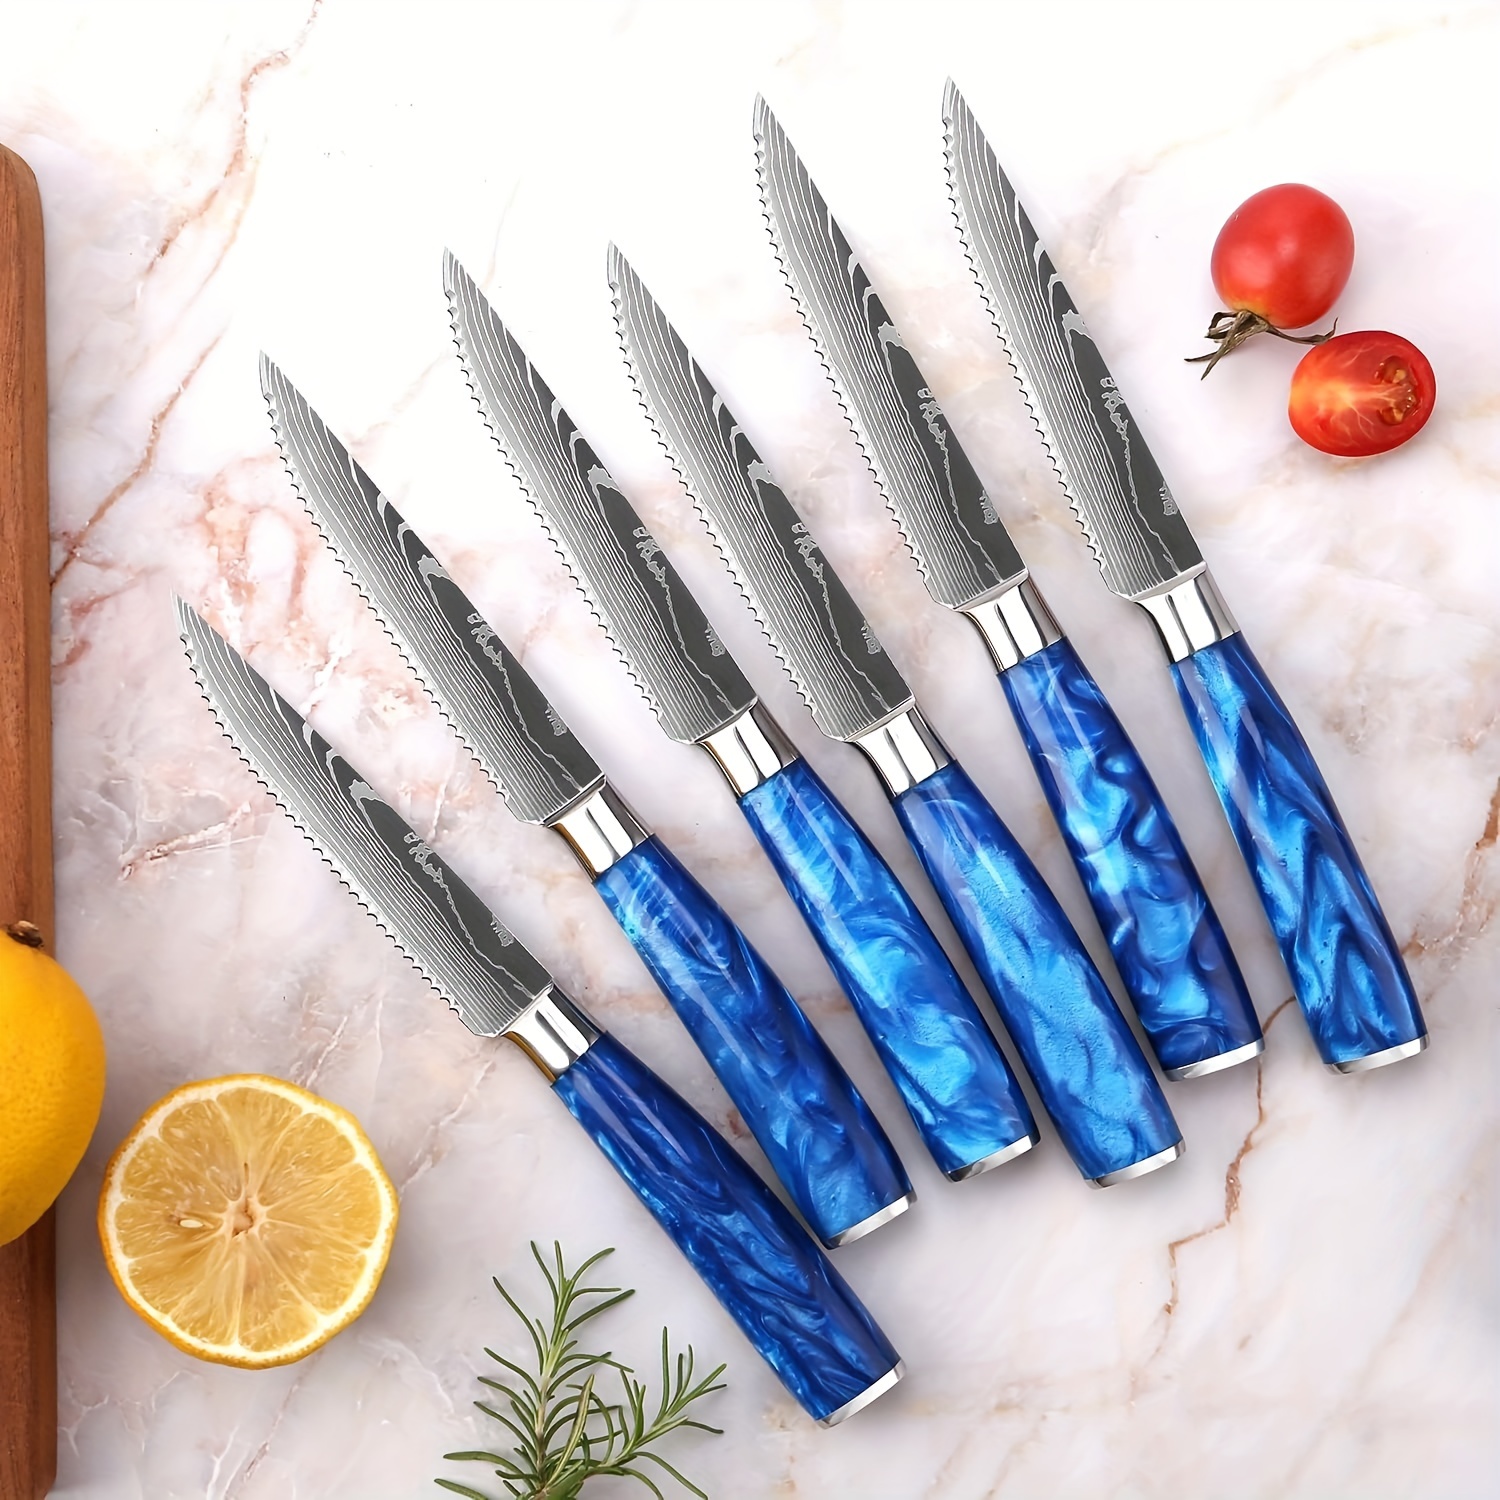 1 Set Of Outdoor Art Knife Damascus Steel Kitchen Peeler With Sheath Fruit  Picnic Knife And Vegetable Chopping Knife L9195